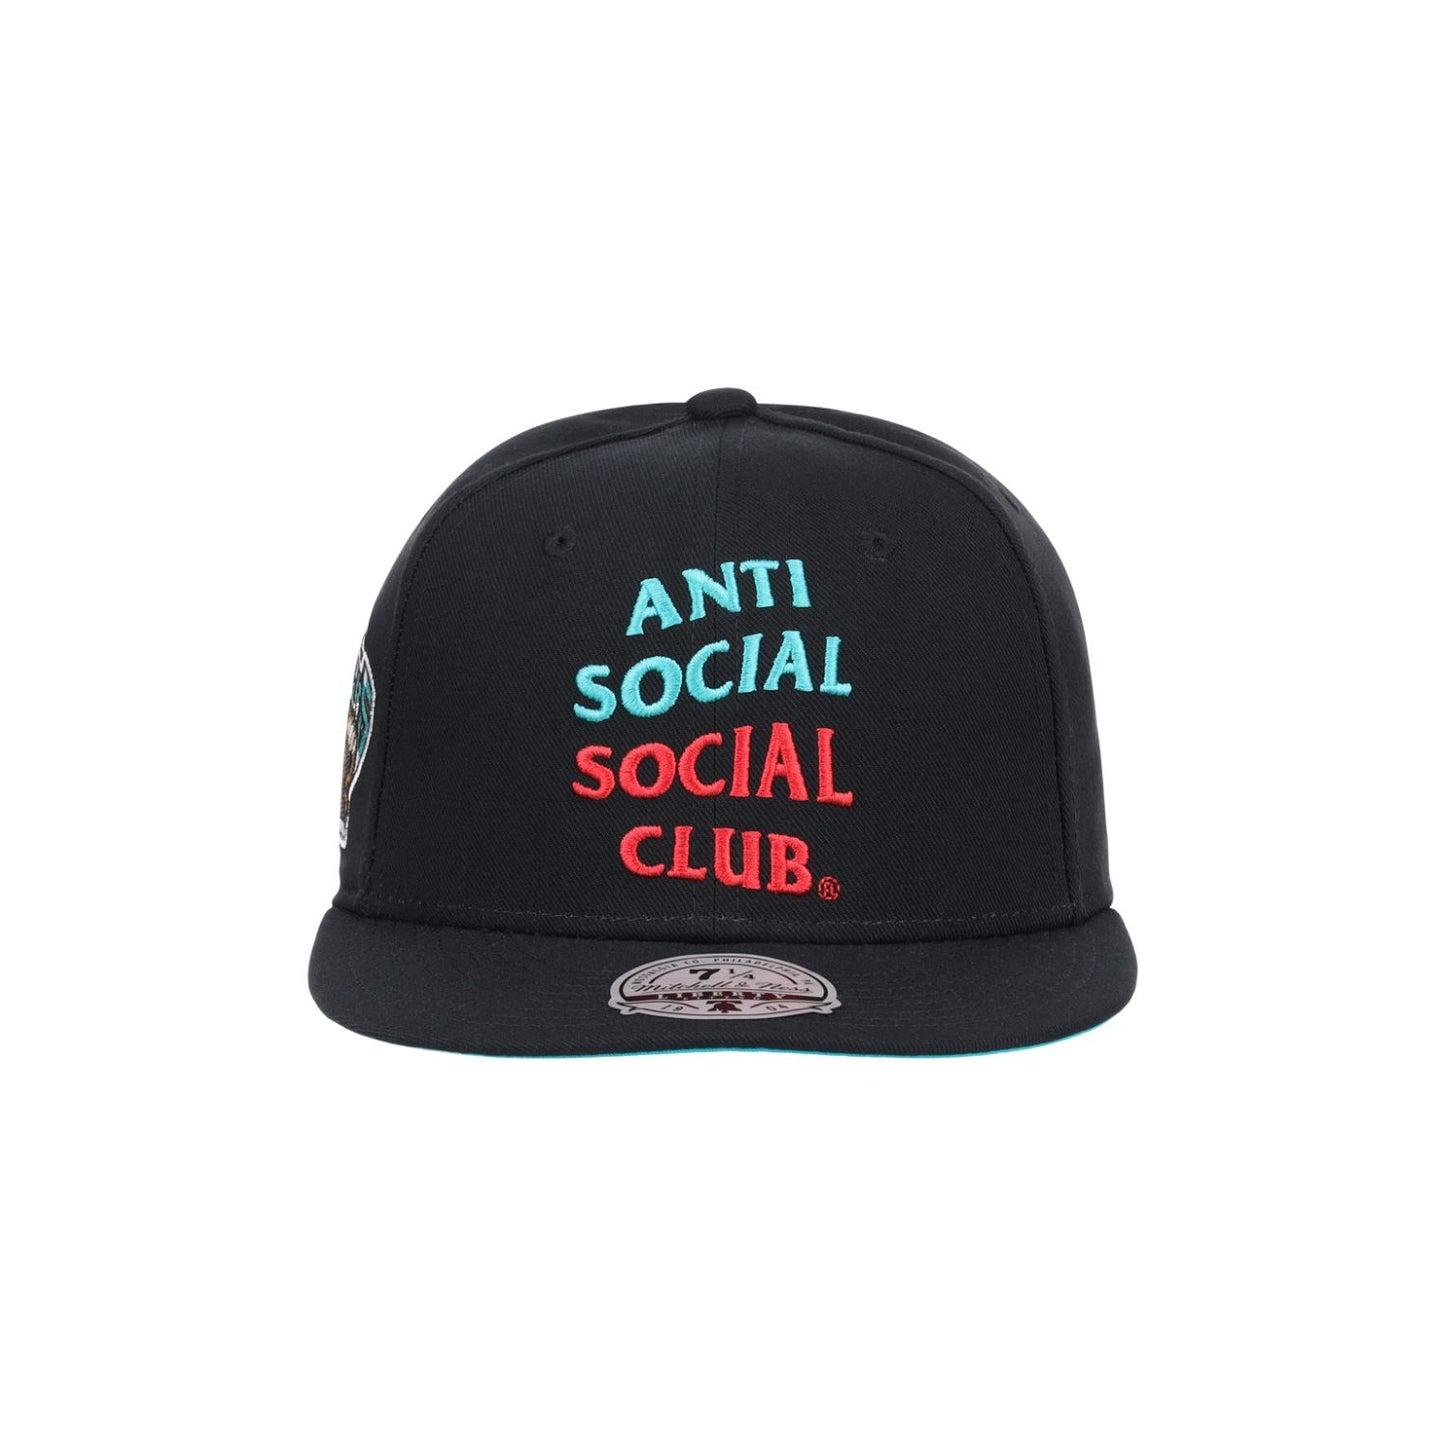 ASSC x Mitchell & Ness Vancouver Grizzlies NBA Fitted